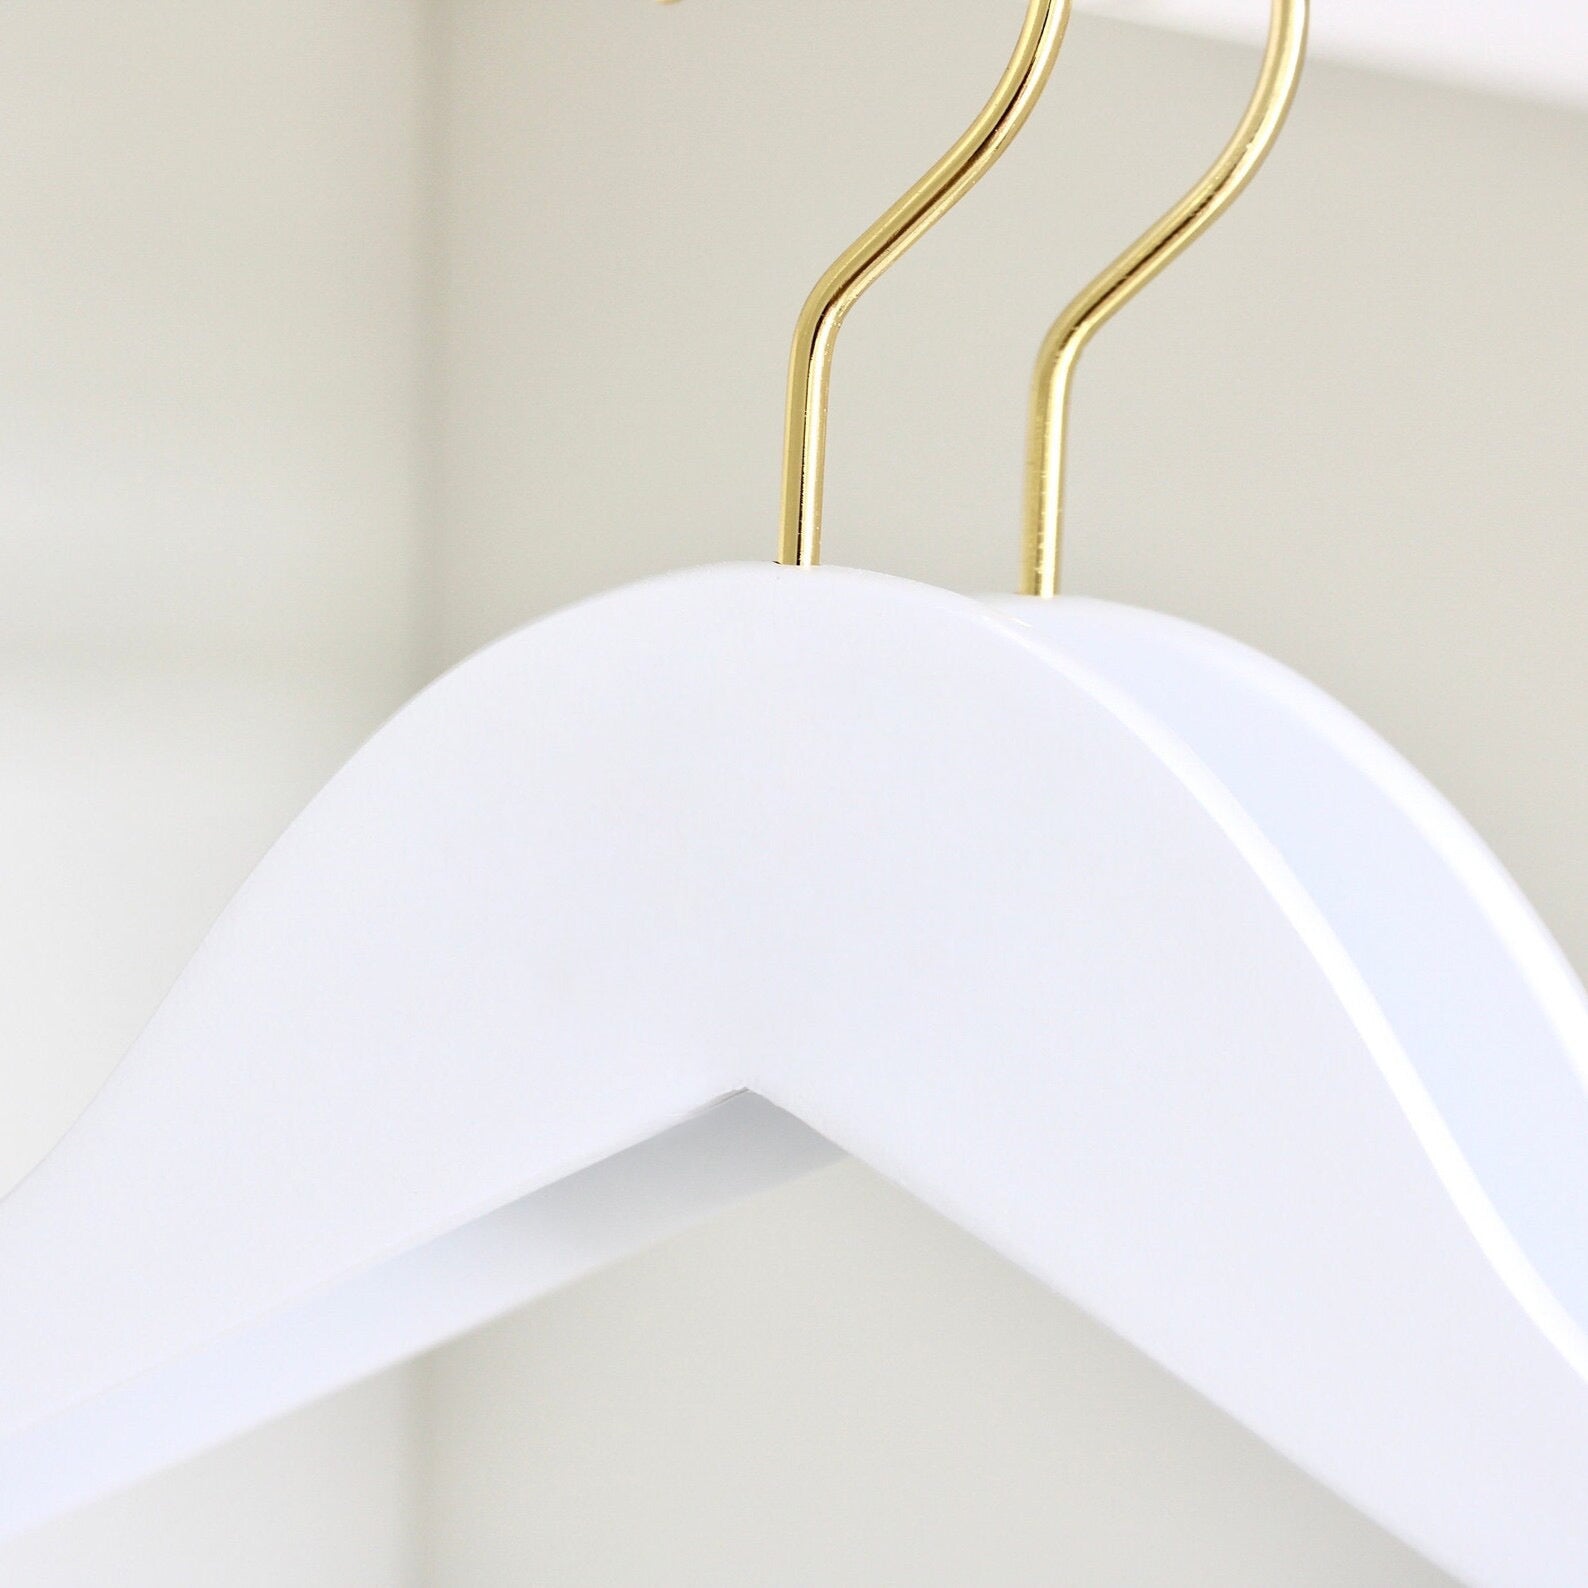 Two wedding quality White Wooden Hangers with gold hooks for custom hanger designers #hook-color_gold-hook